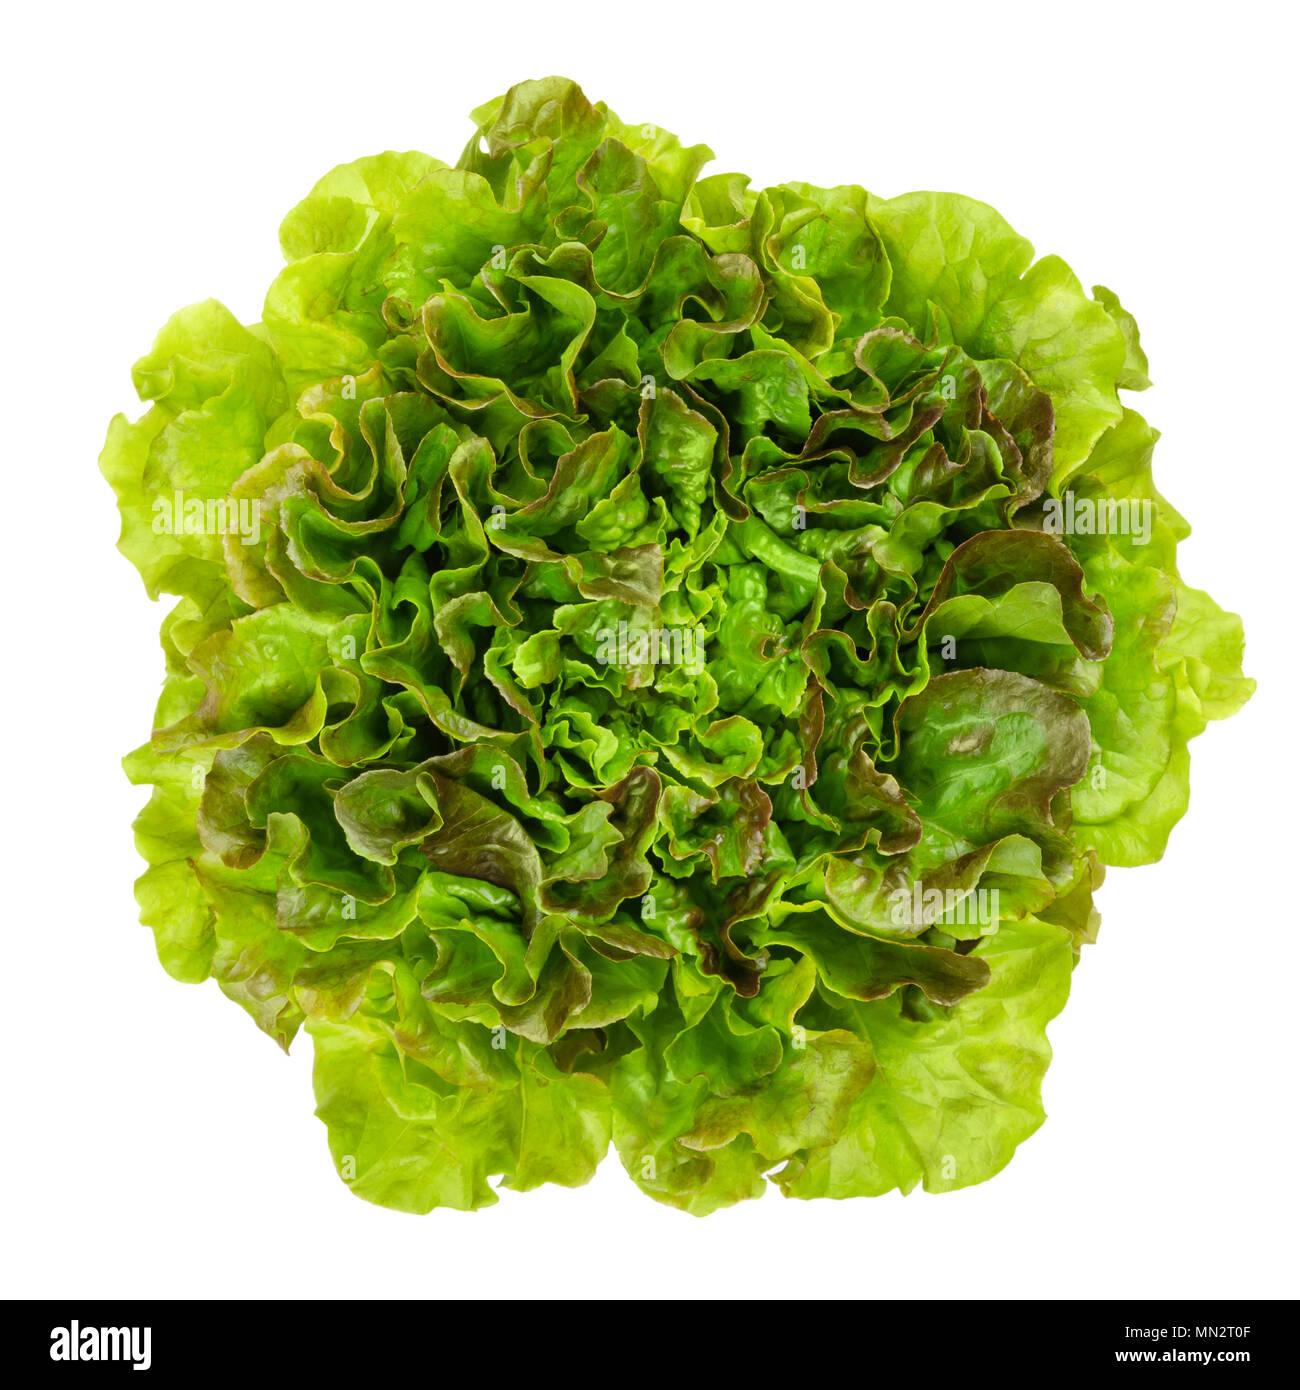 Young Batavia Red lettuce from above. Summer or French crisp. Loose leaf lettuce. Reddish green salad head with crinkled leafs and wavy leaf margin. Stock Photo